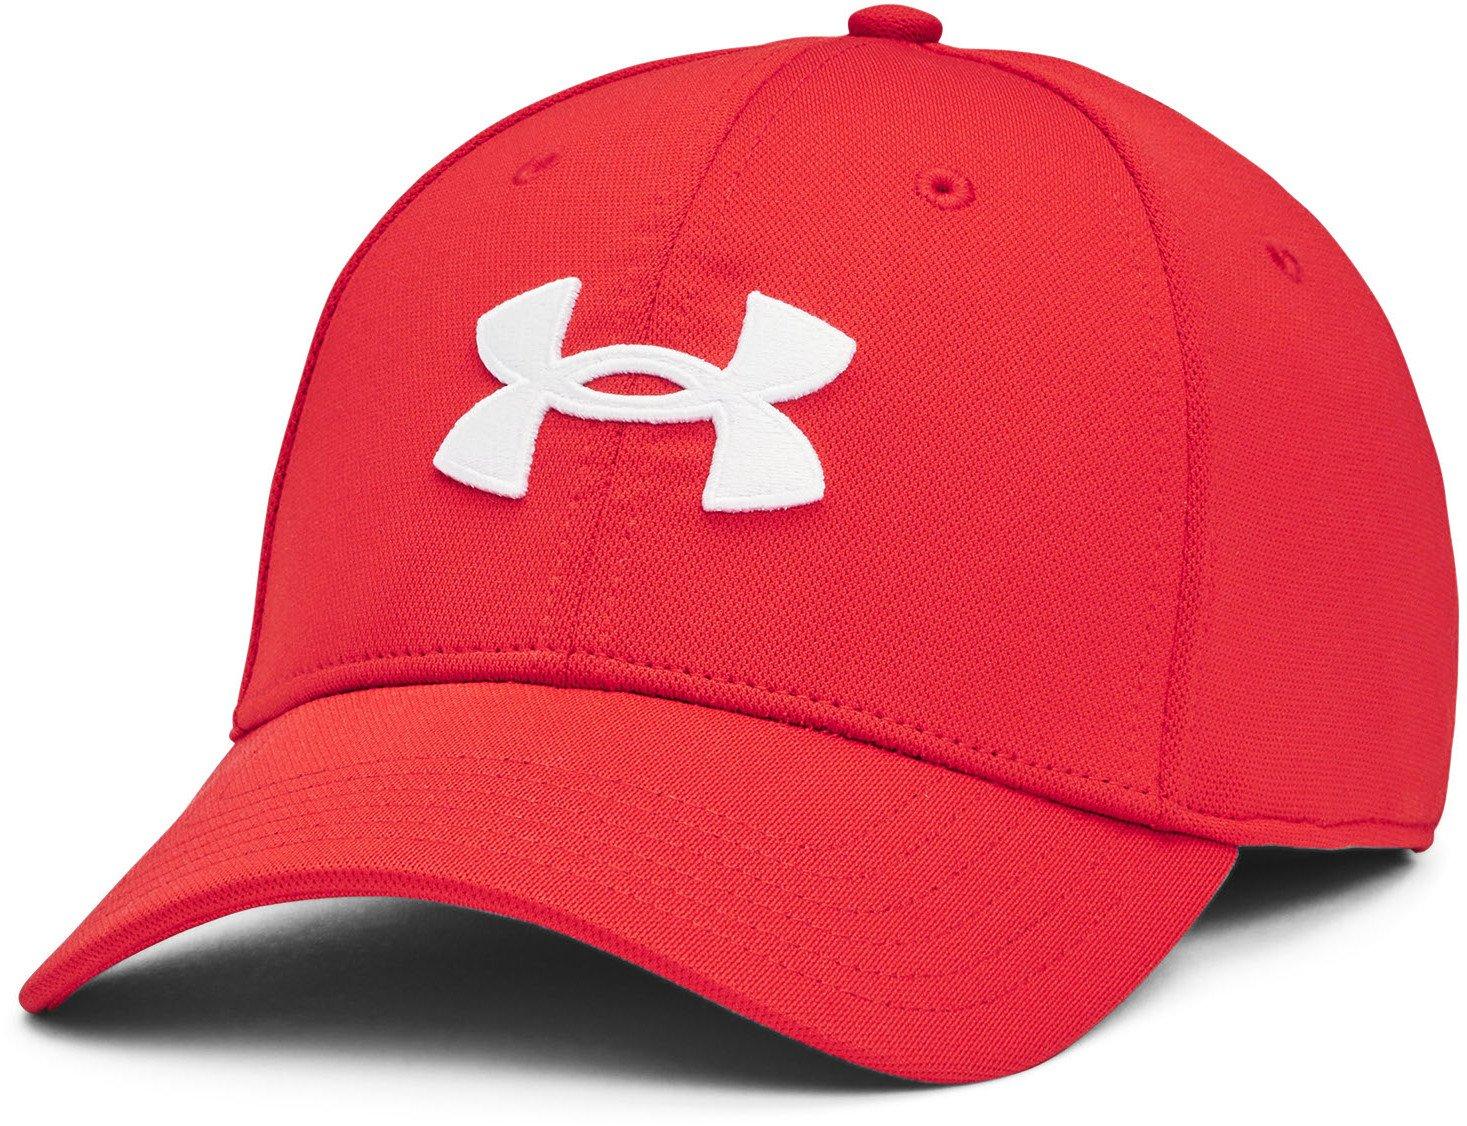 Under Armour Blitzing-RED L/XL